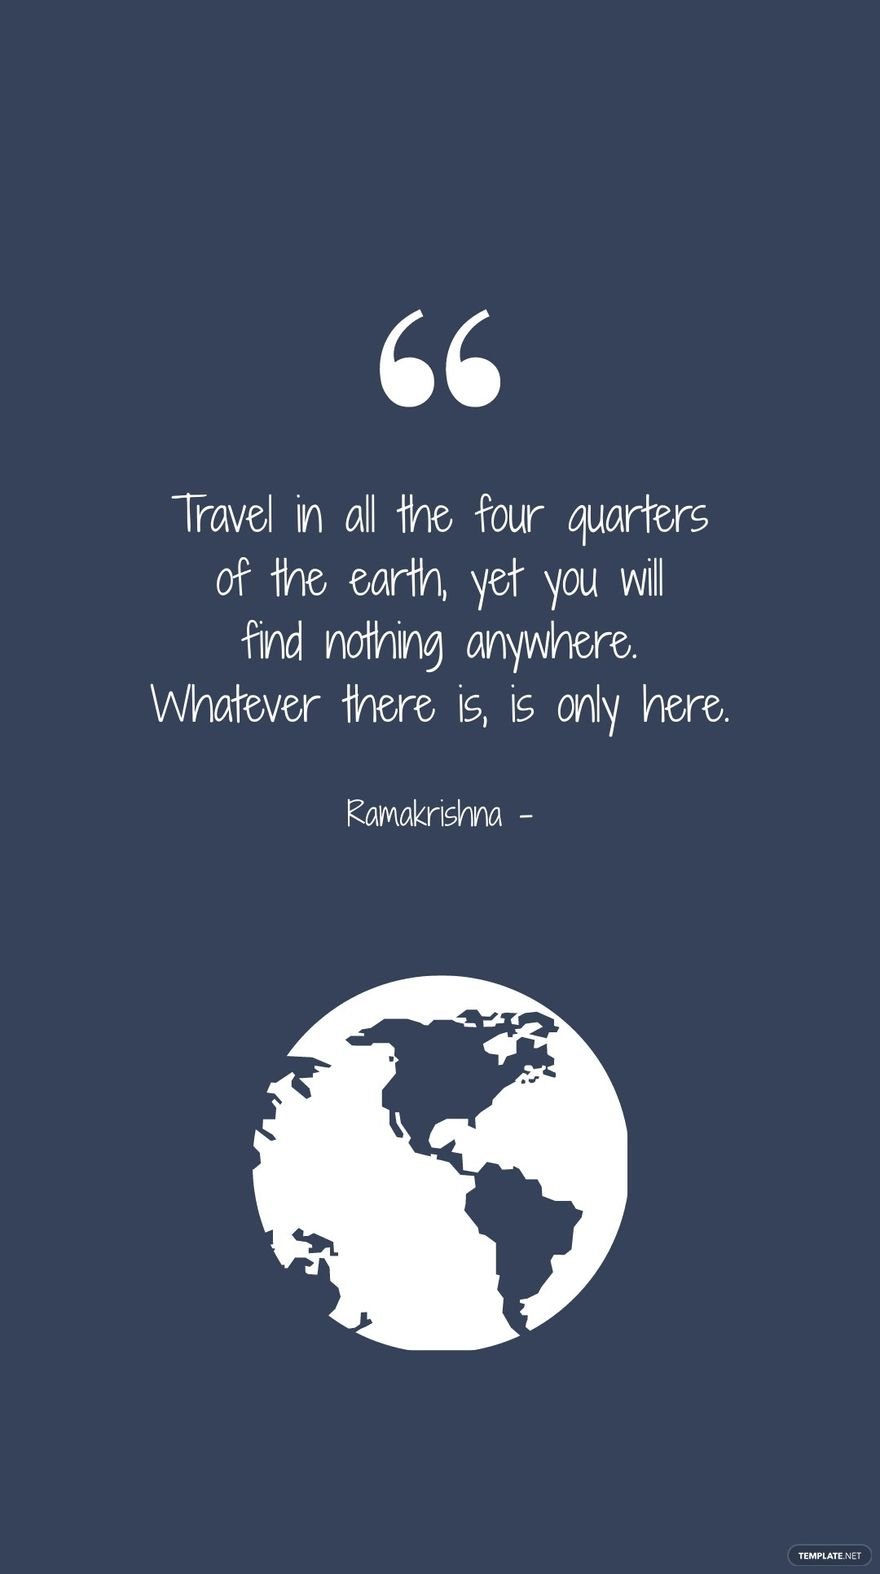 Ramakrishna - Travel in all the four quarters of the earth, yet you will find nothing anywhere. Whatever there is, is only here.